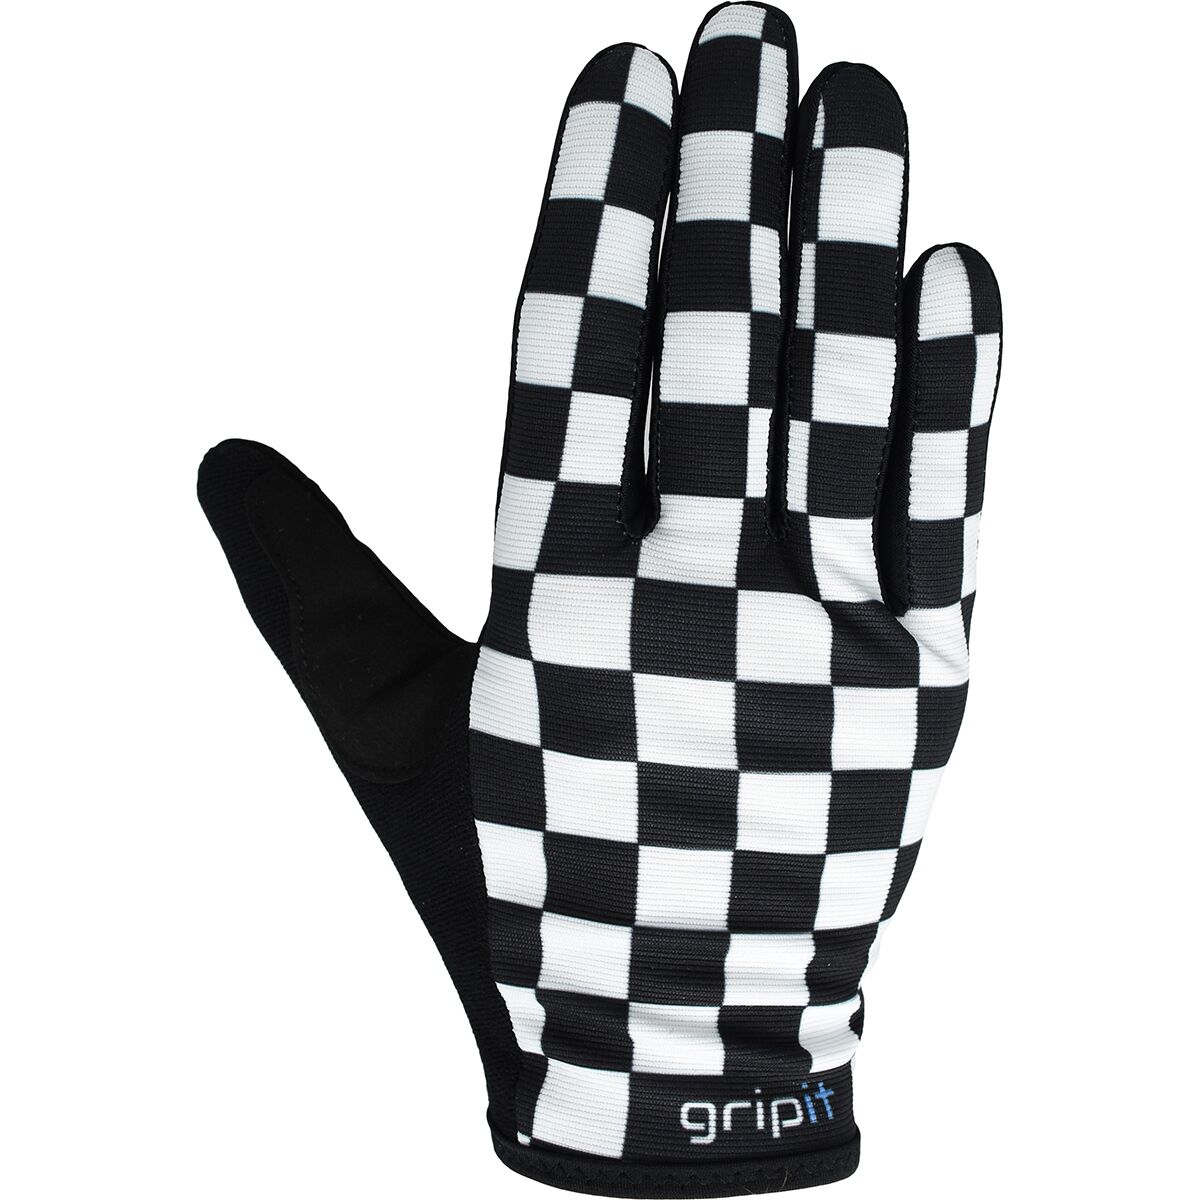 GripIt Checkered All Ride Glove